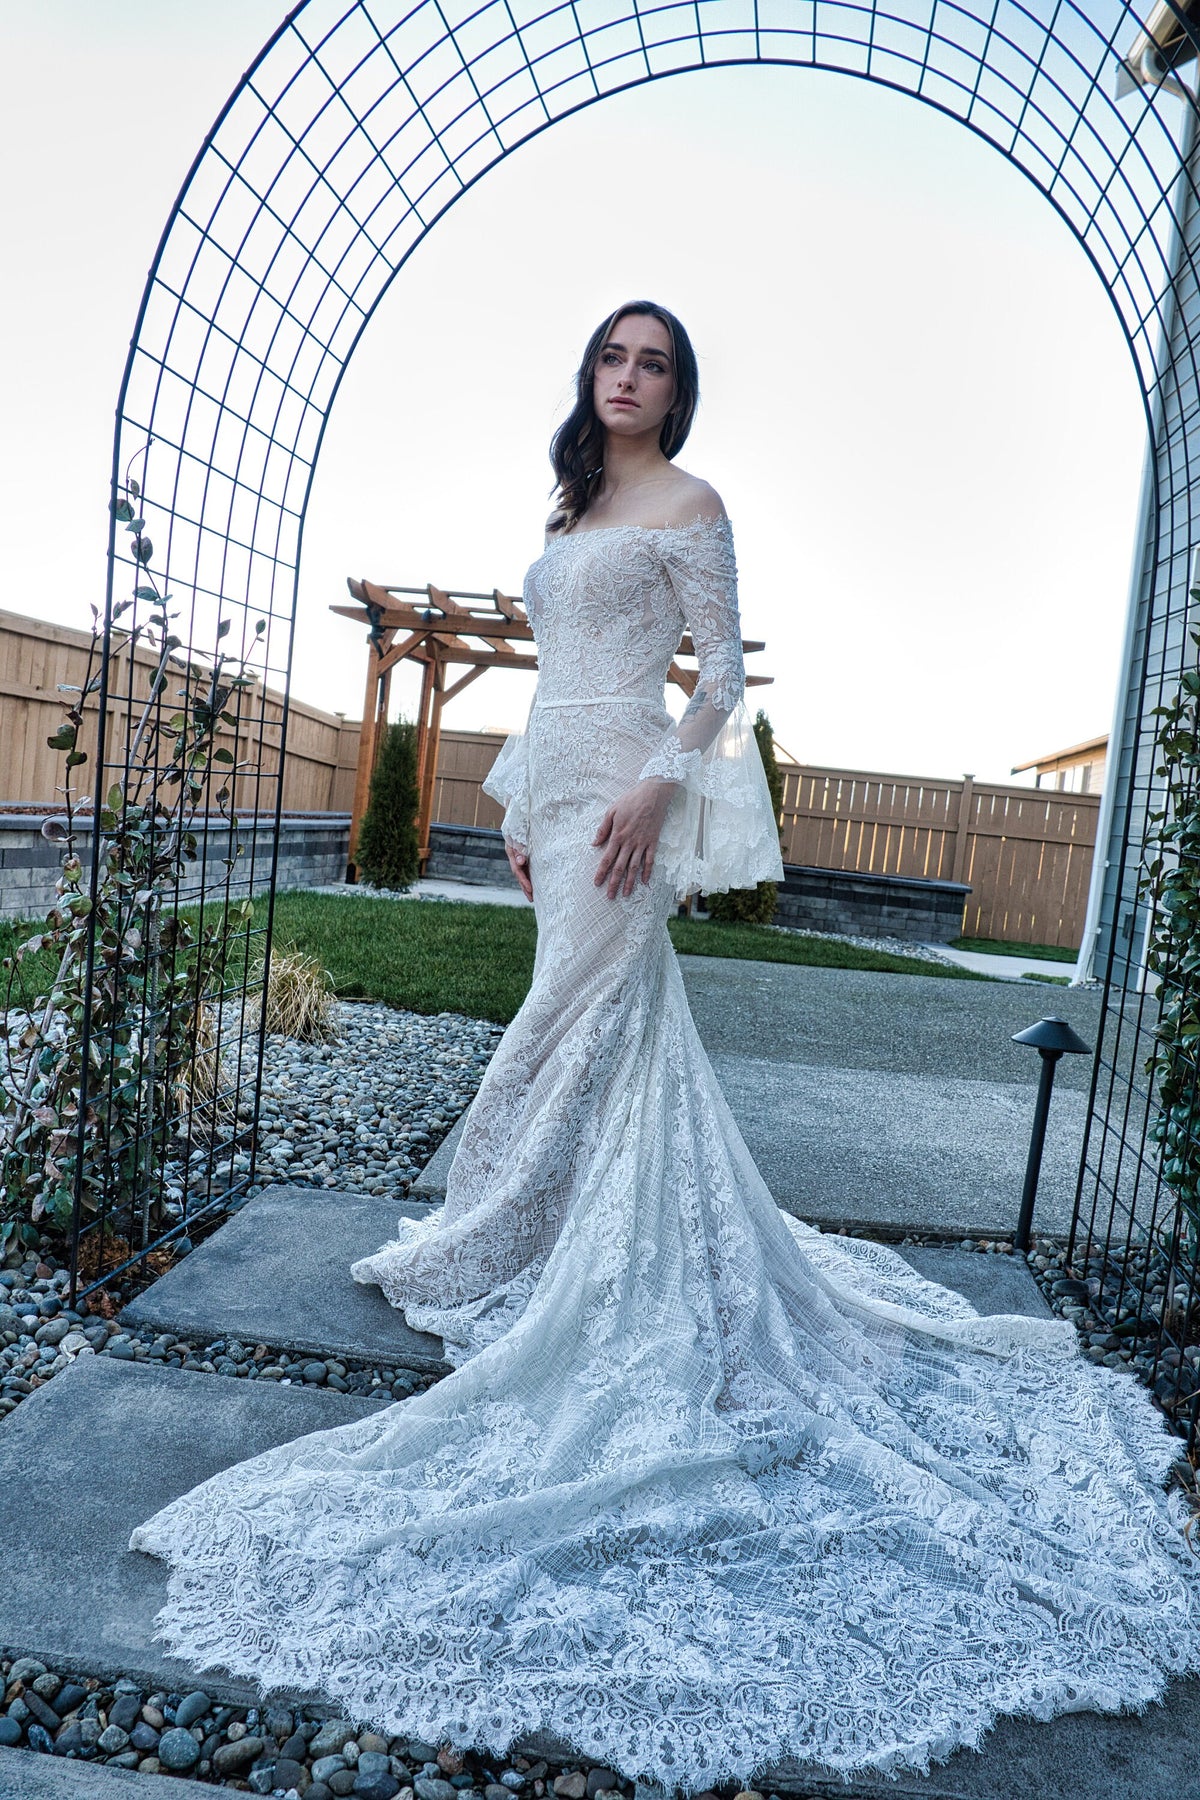 Beautiful Lace Off the Shoulder Long Sleeve Straight Neckline Mermaid Fit and Flare Wedding Dress Bridal Gown All Over Lace Vintage Style